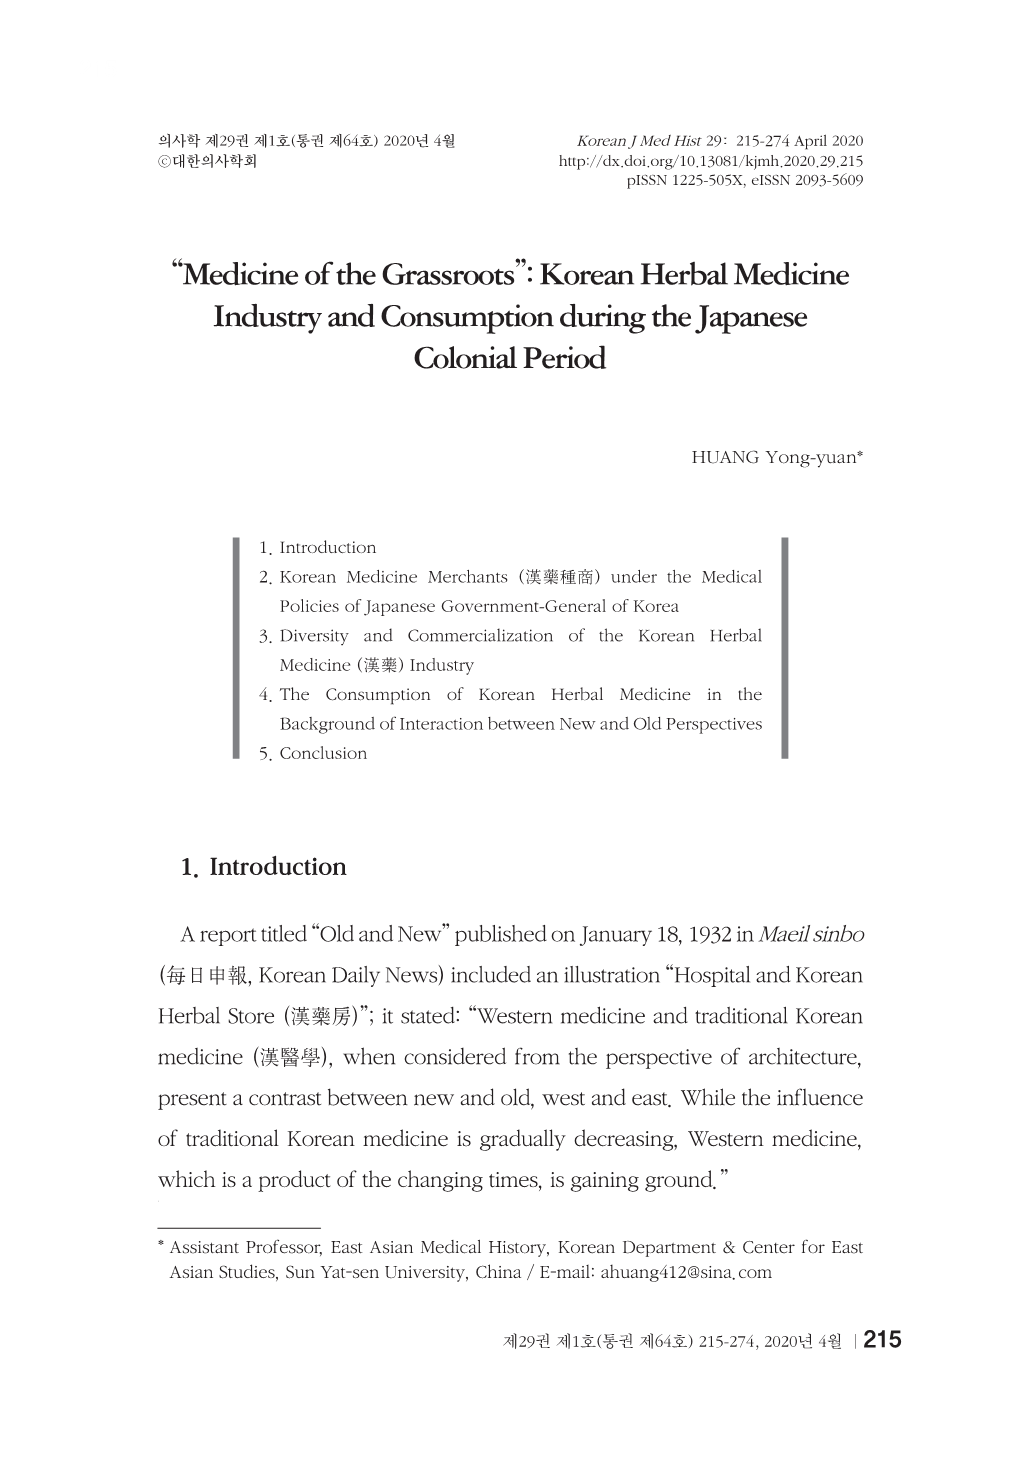 Korean Herbal Medicine Industry and Consumption During the Japanese Colonial Period